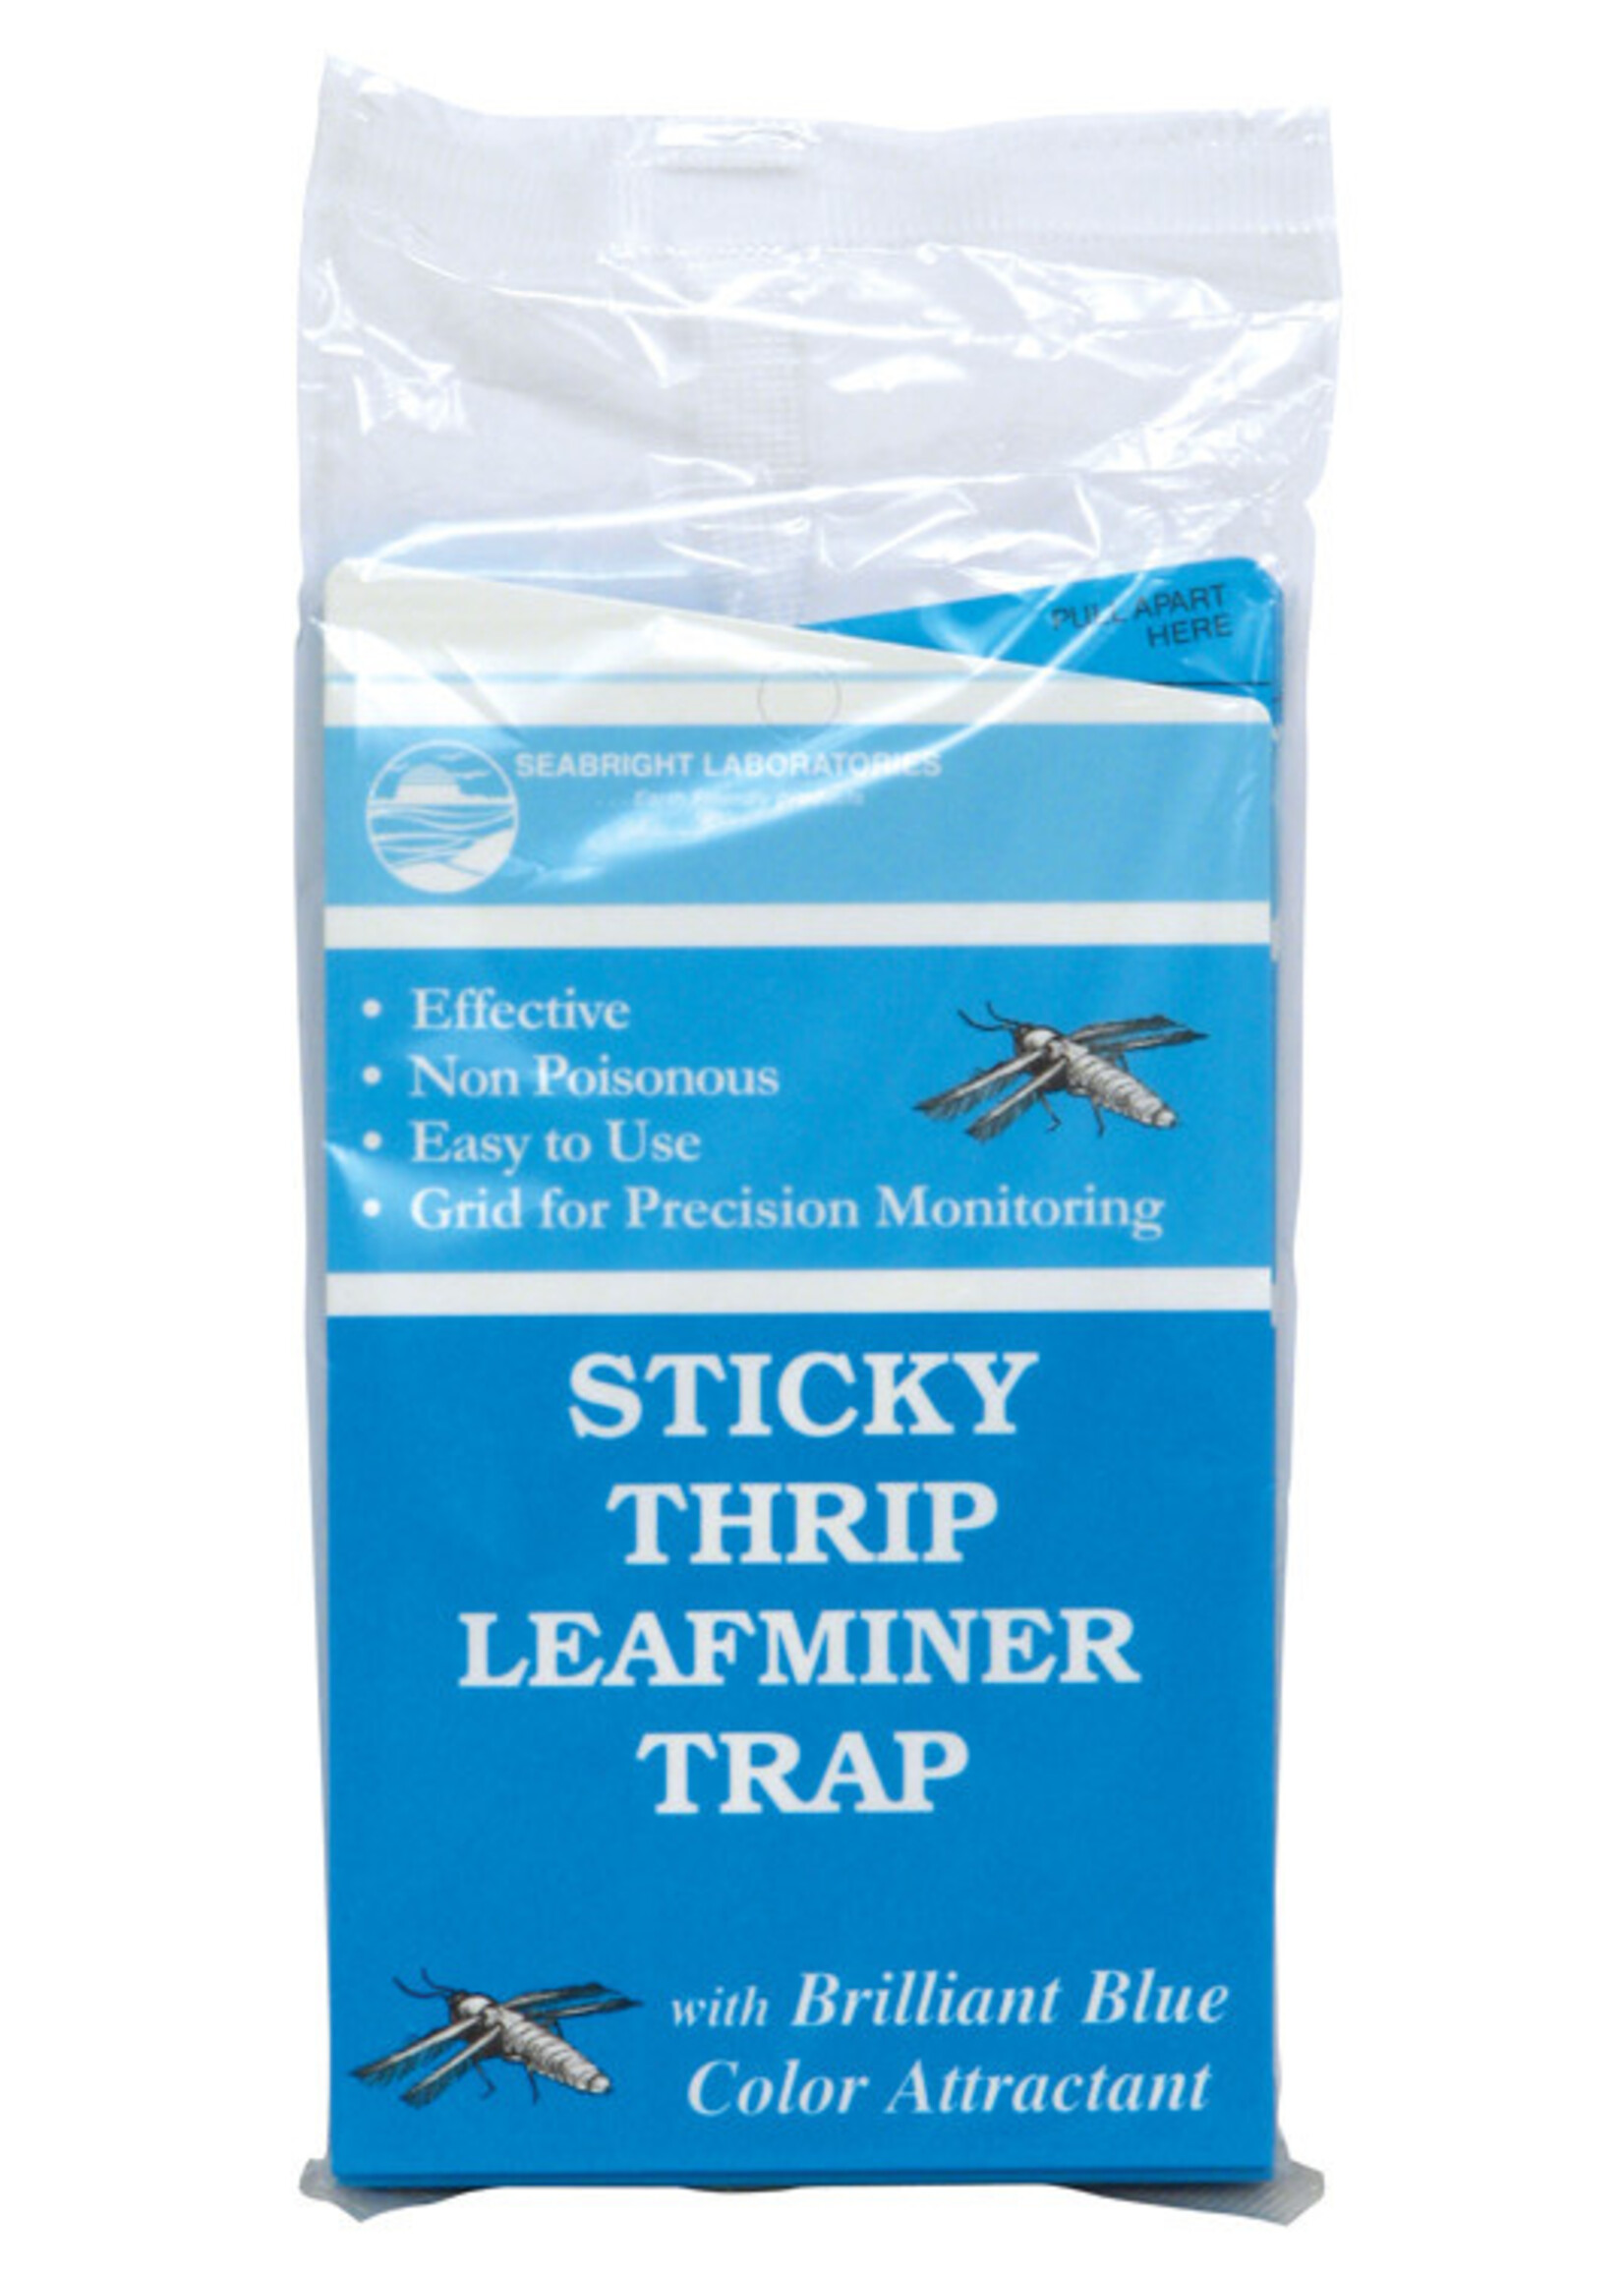 Seabright Sticky Thrip Leafminer Trap 5/Pack (80/Cs)